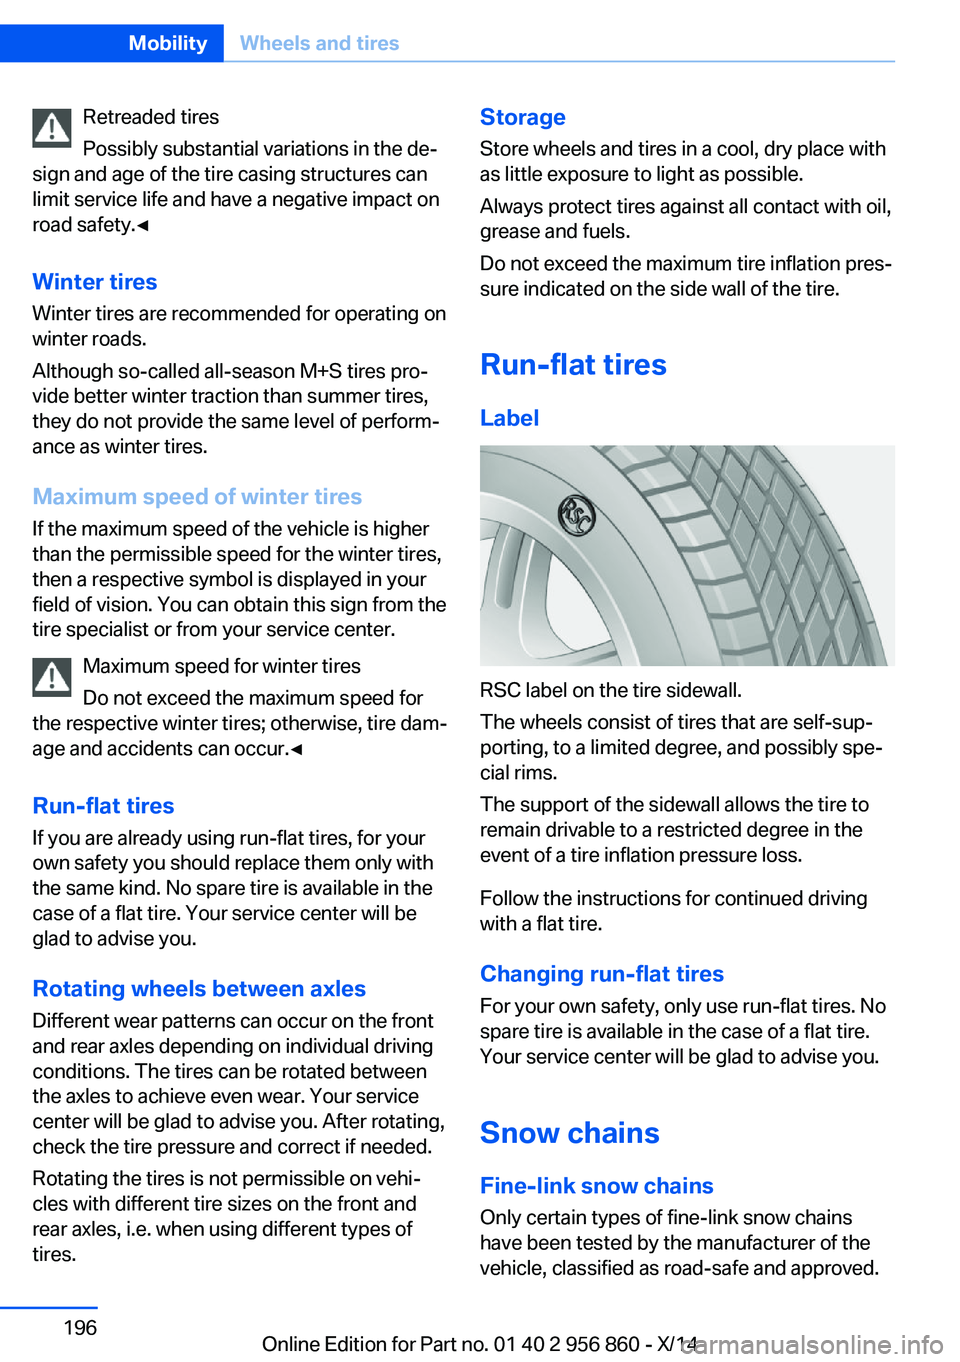 BMW 435I CONVERTIBLE 2014  Owners Manual Retreaded tires
Possibly substantial variations in the de‐
sign and age of the tire casing structures can
limit service life and have a negative impact on
road safety.◀
Winter tires
Winter tires a